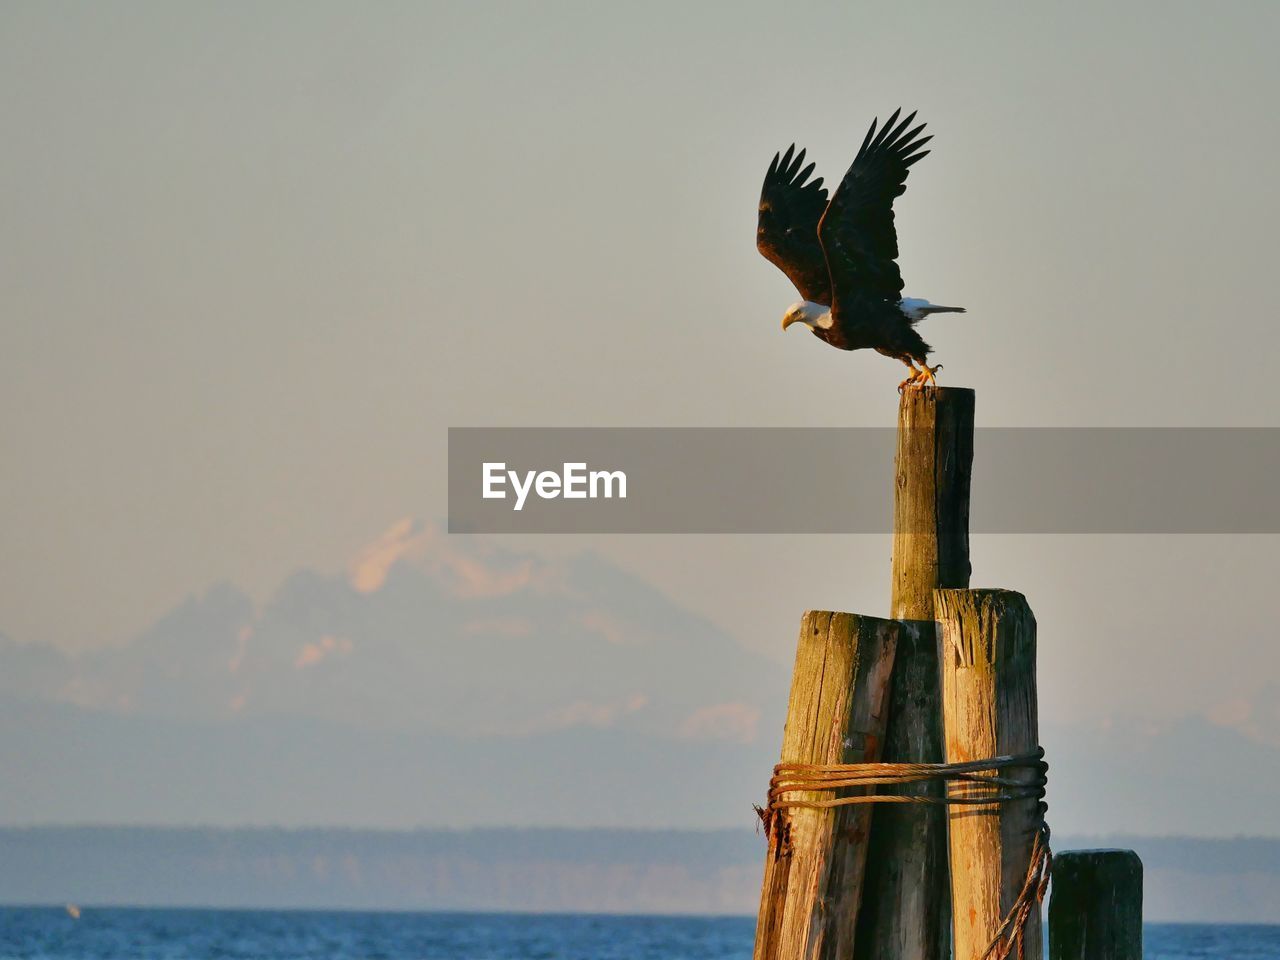 Eagle perching on wooden post by sea against clear sky